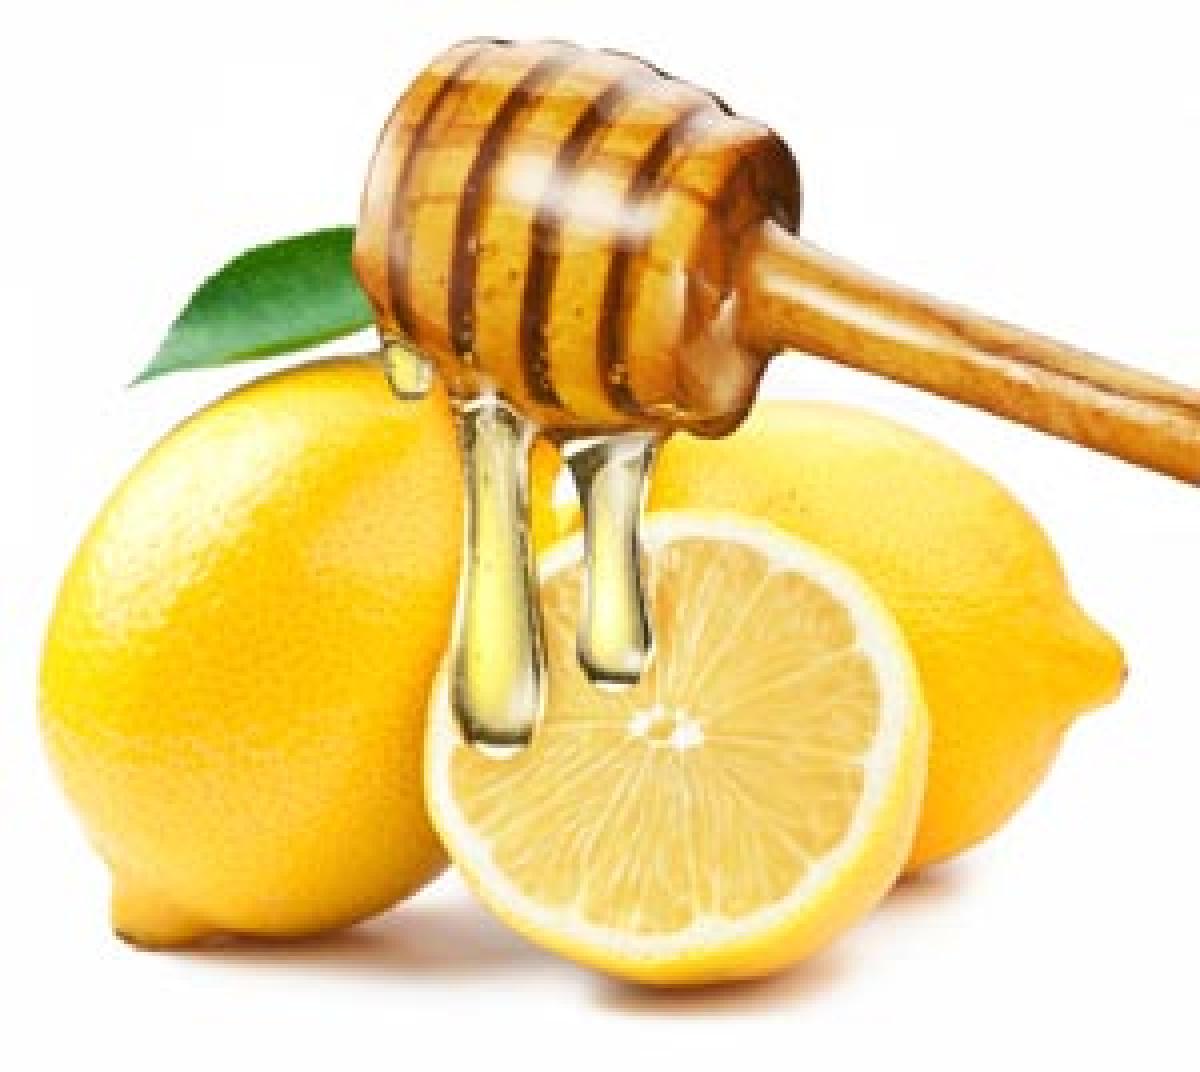 Go natural with lemon!